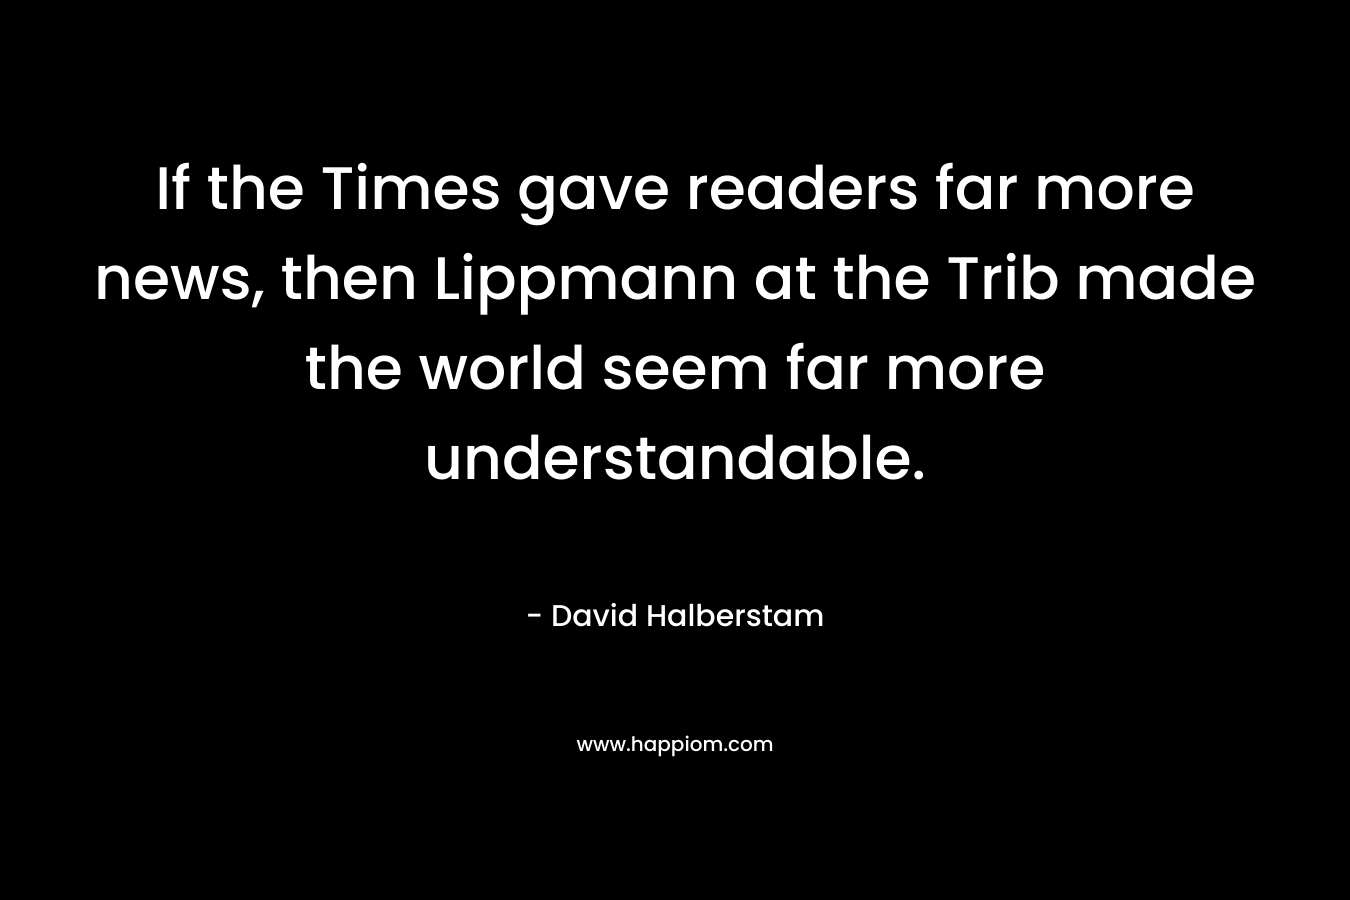 If the Times gave readers far more news, then Lippmann at the Trib made the world seem far more understandable.